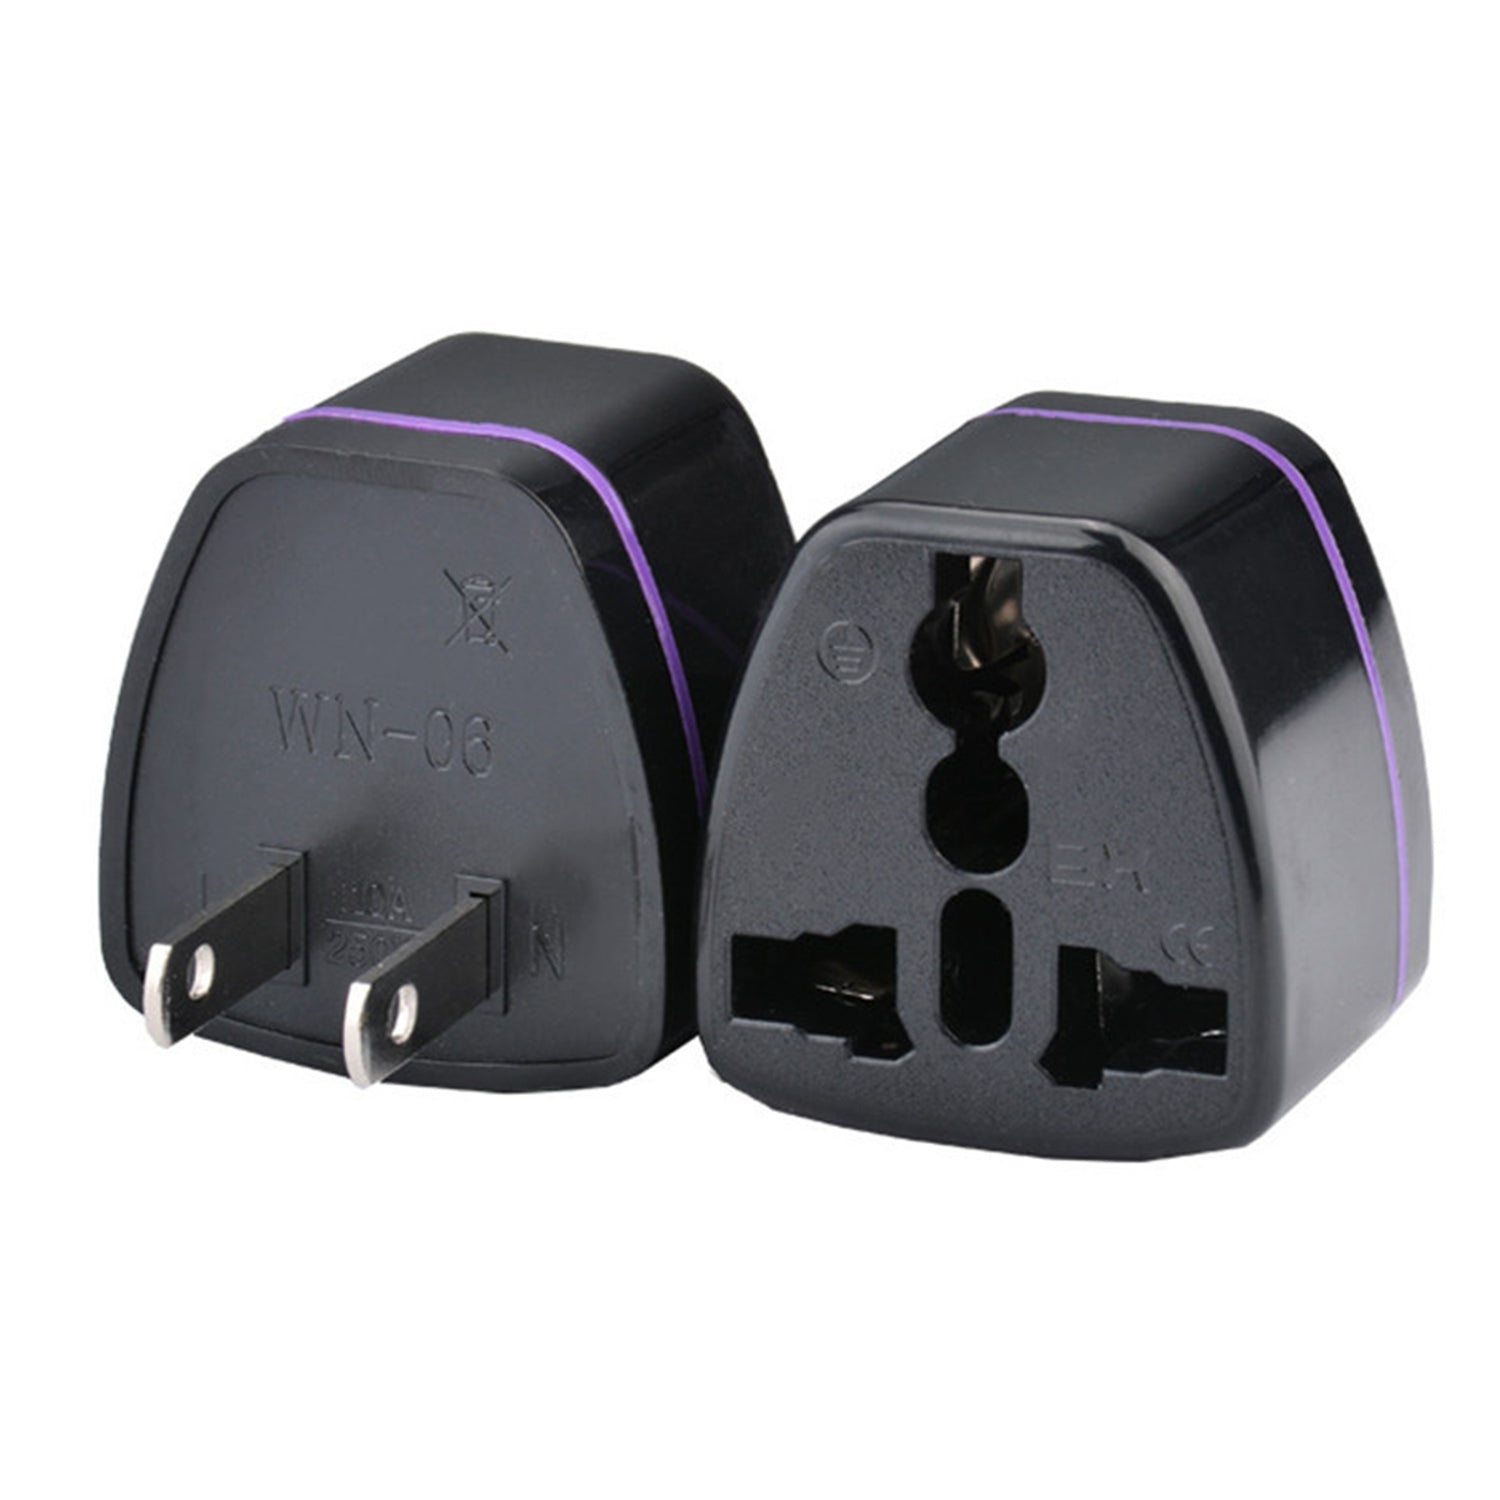 Universal Travel Outlet Plug Adapter Converter to US